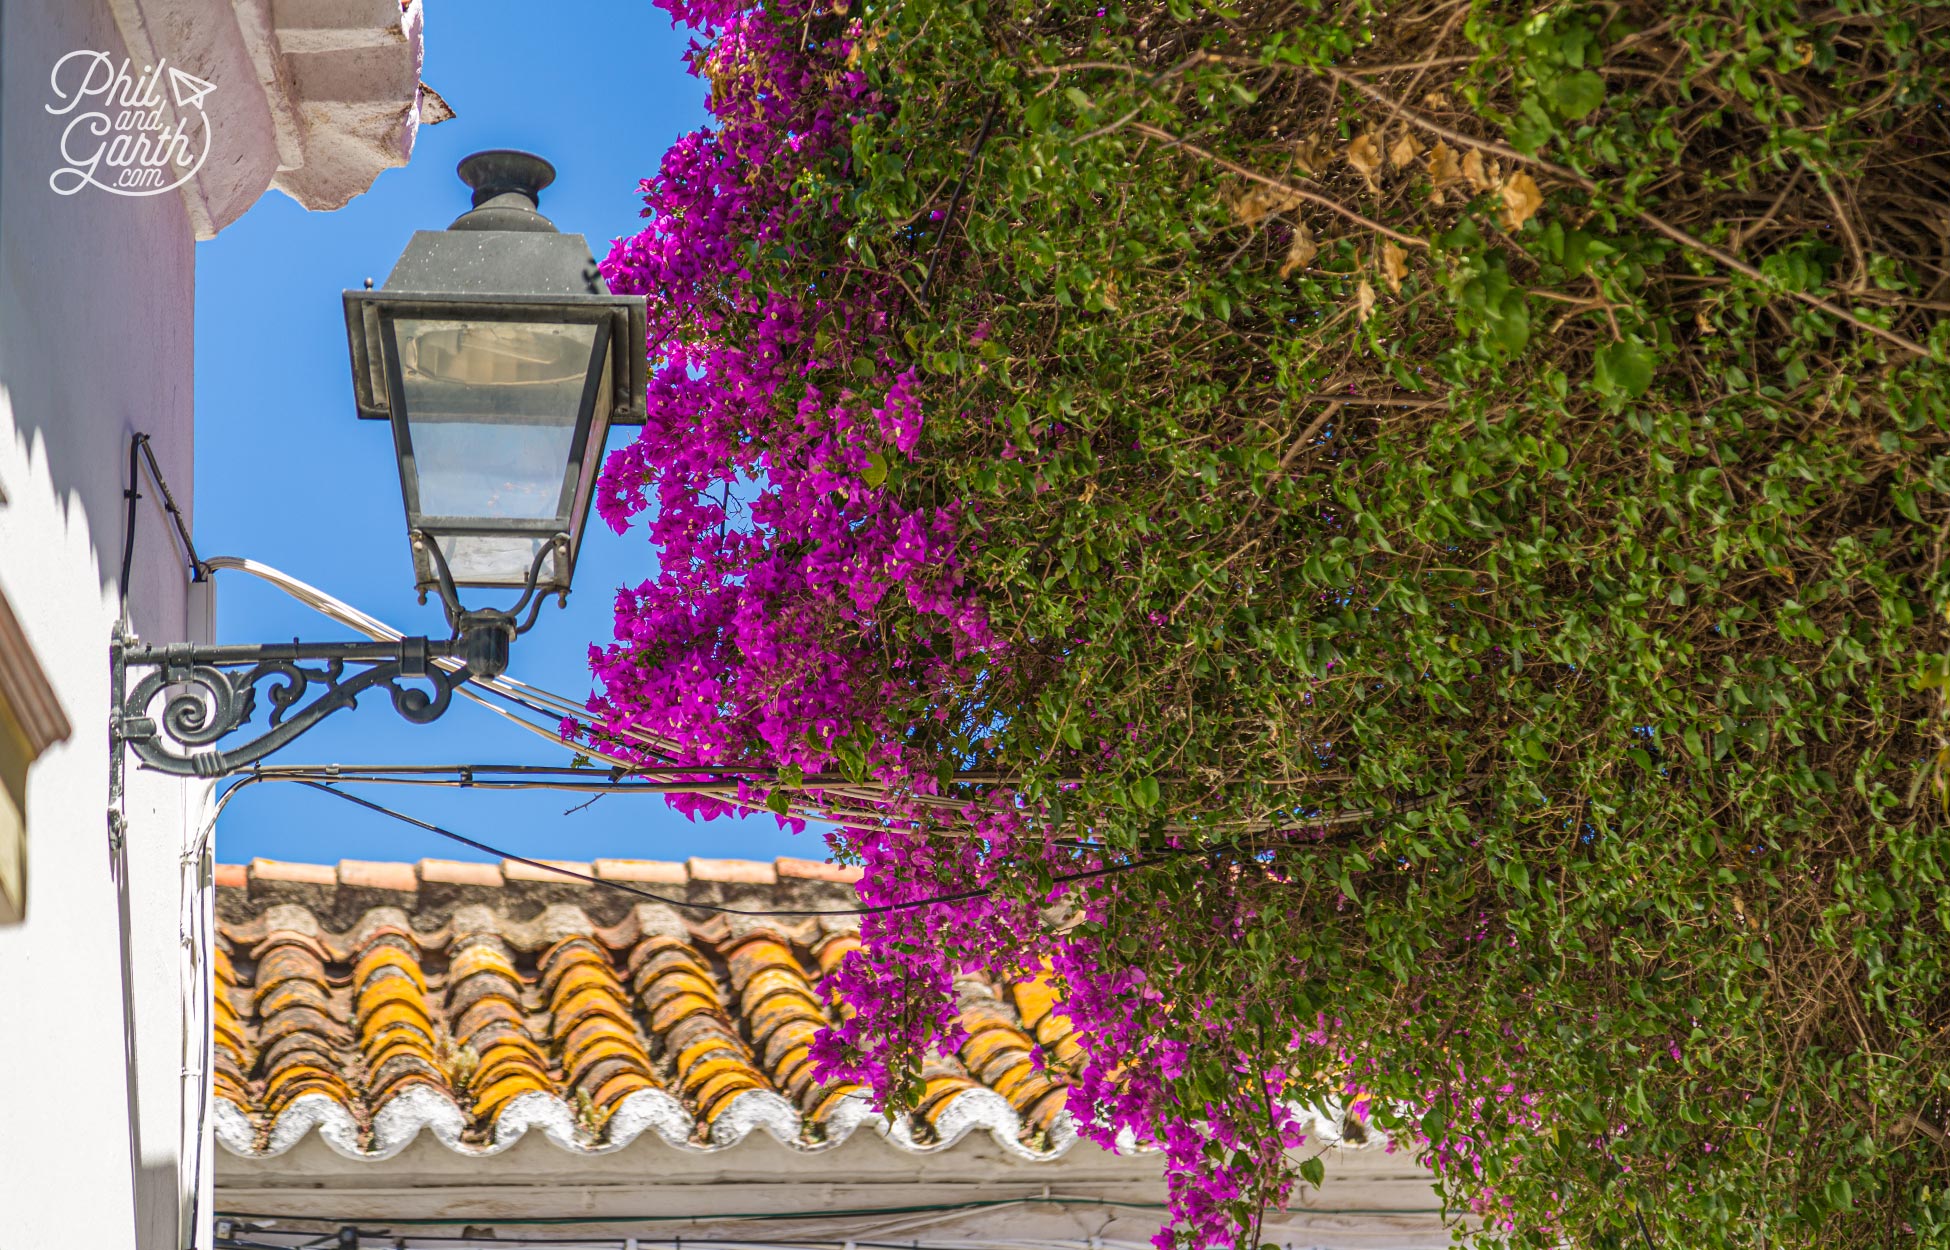 So many old fashioned street lamps add to the charm of Marbella